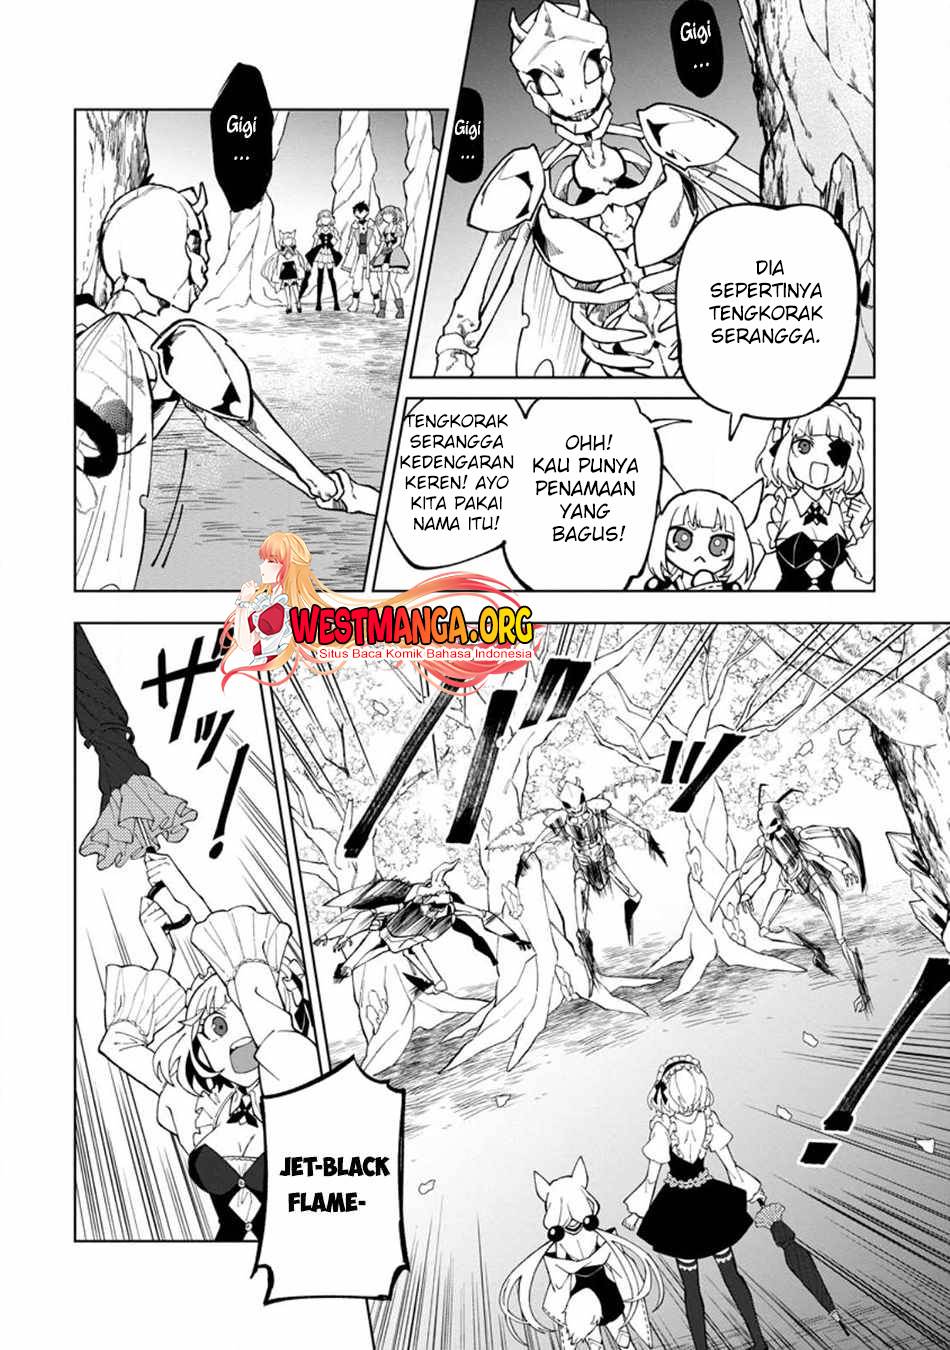 The White Mage Who Was Banished From the Hero’s Party Is Picked up by an S Rank Adventurer ~ This White Mage Is Too Out of the Ordinary! Chapter 25